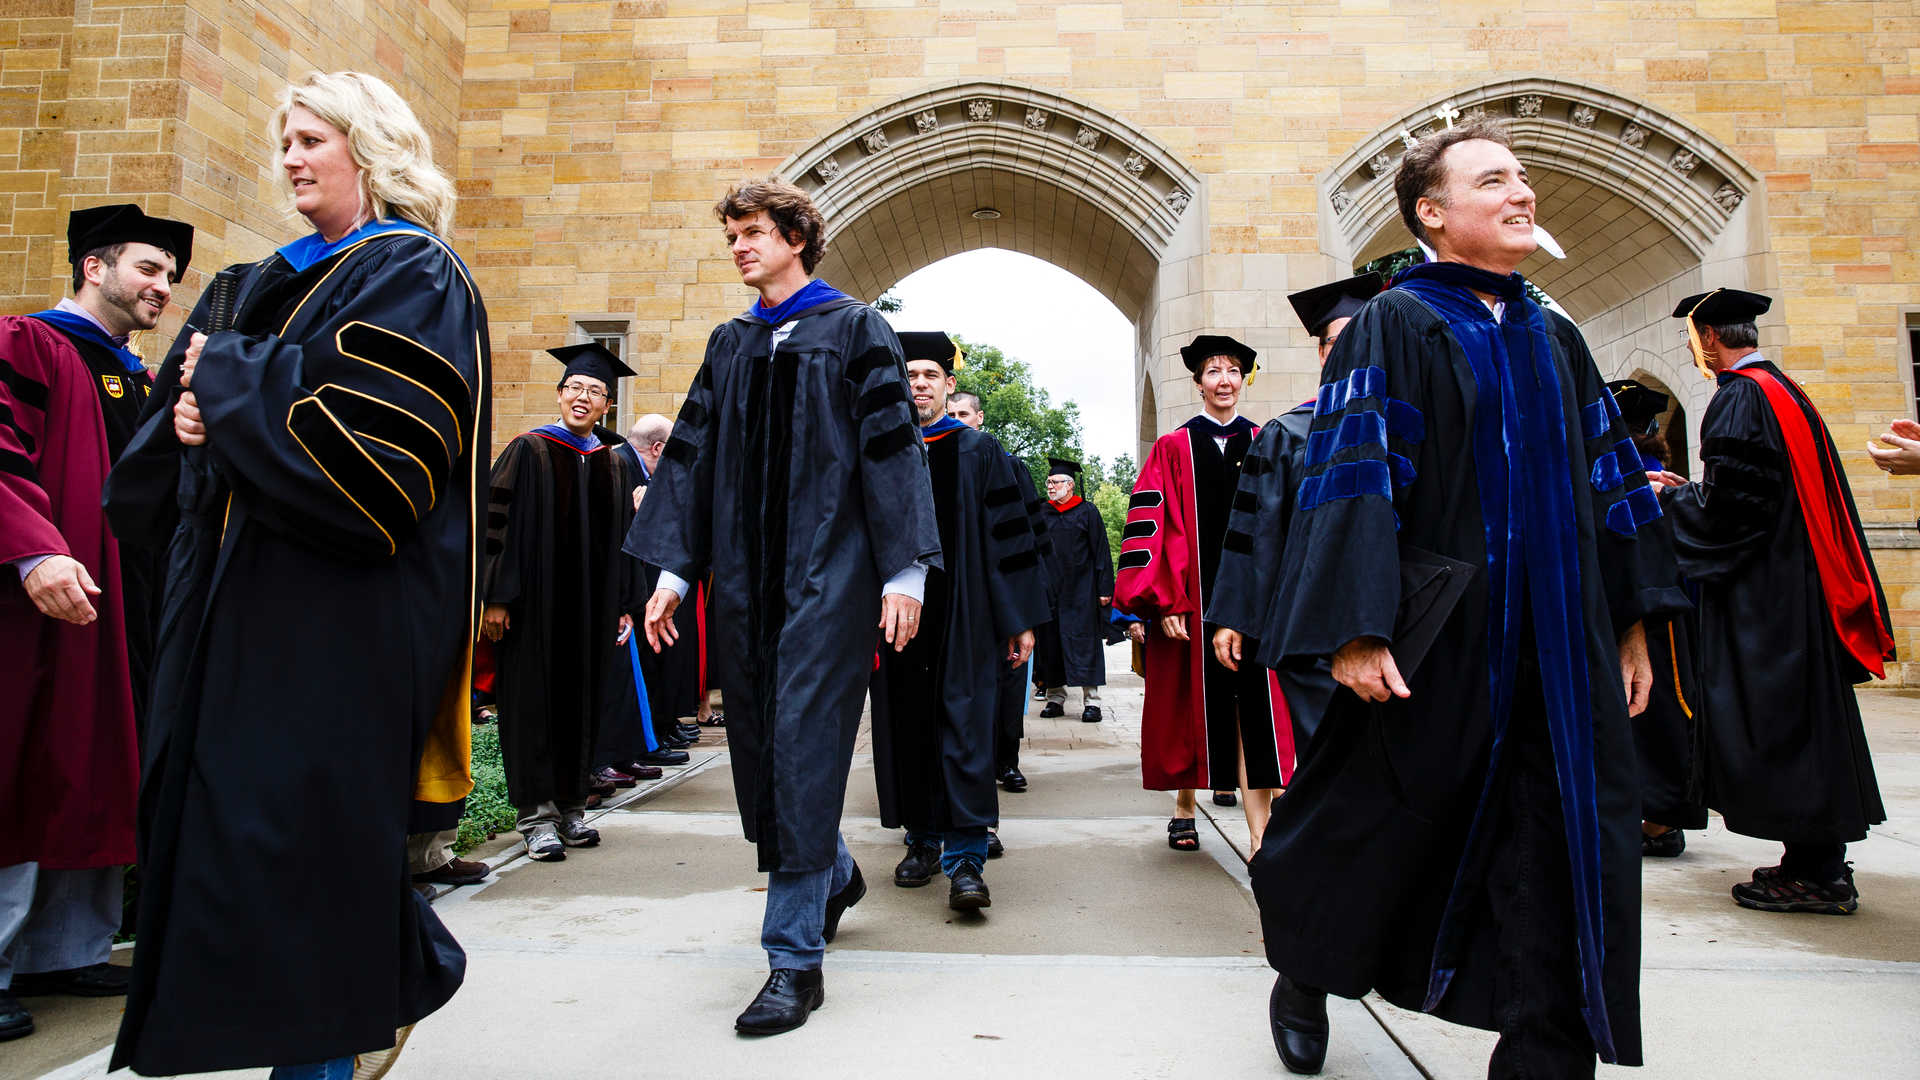 St. Thomas faculty marching through arches